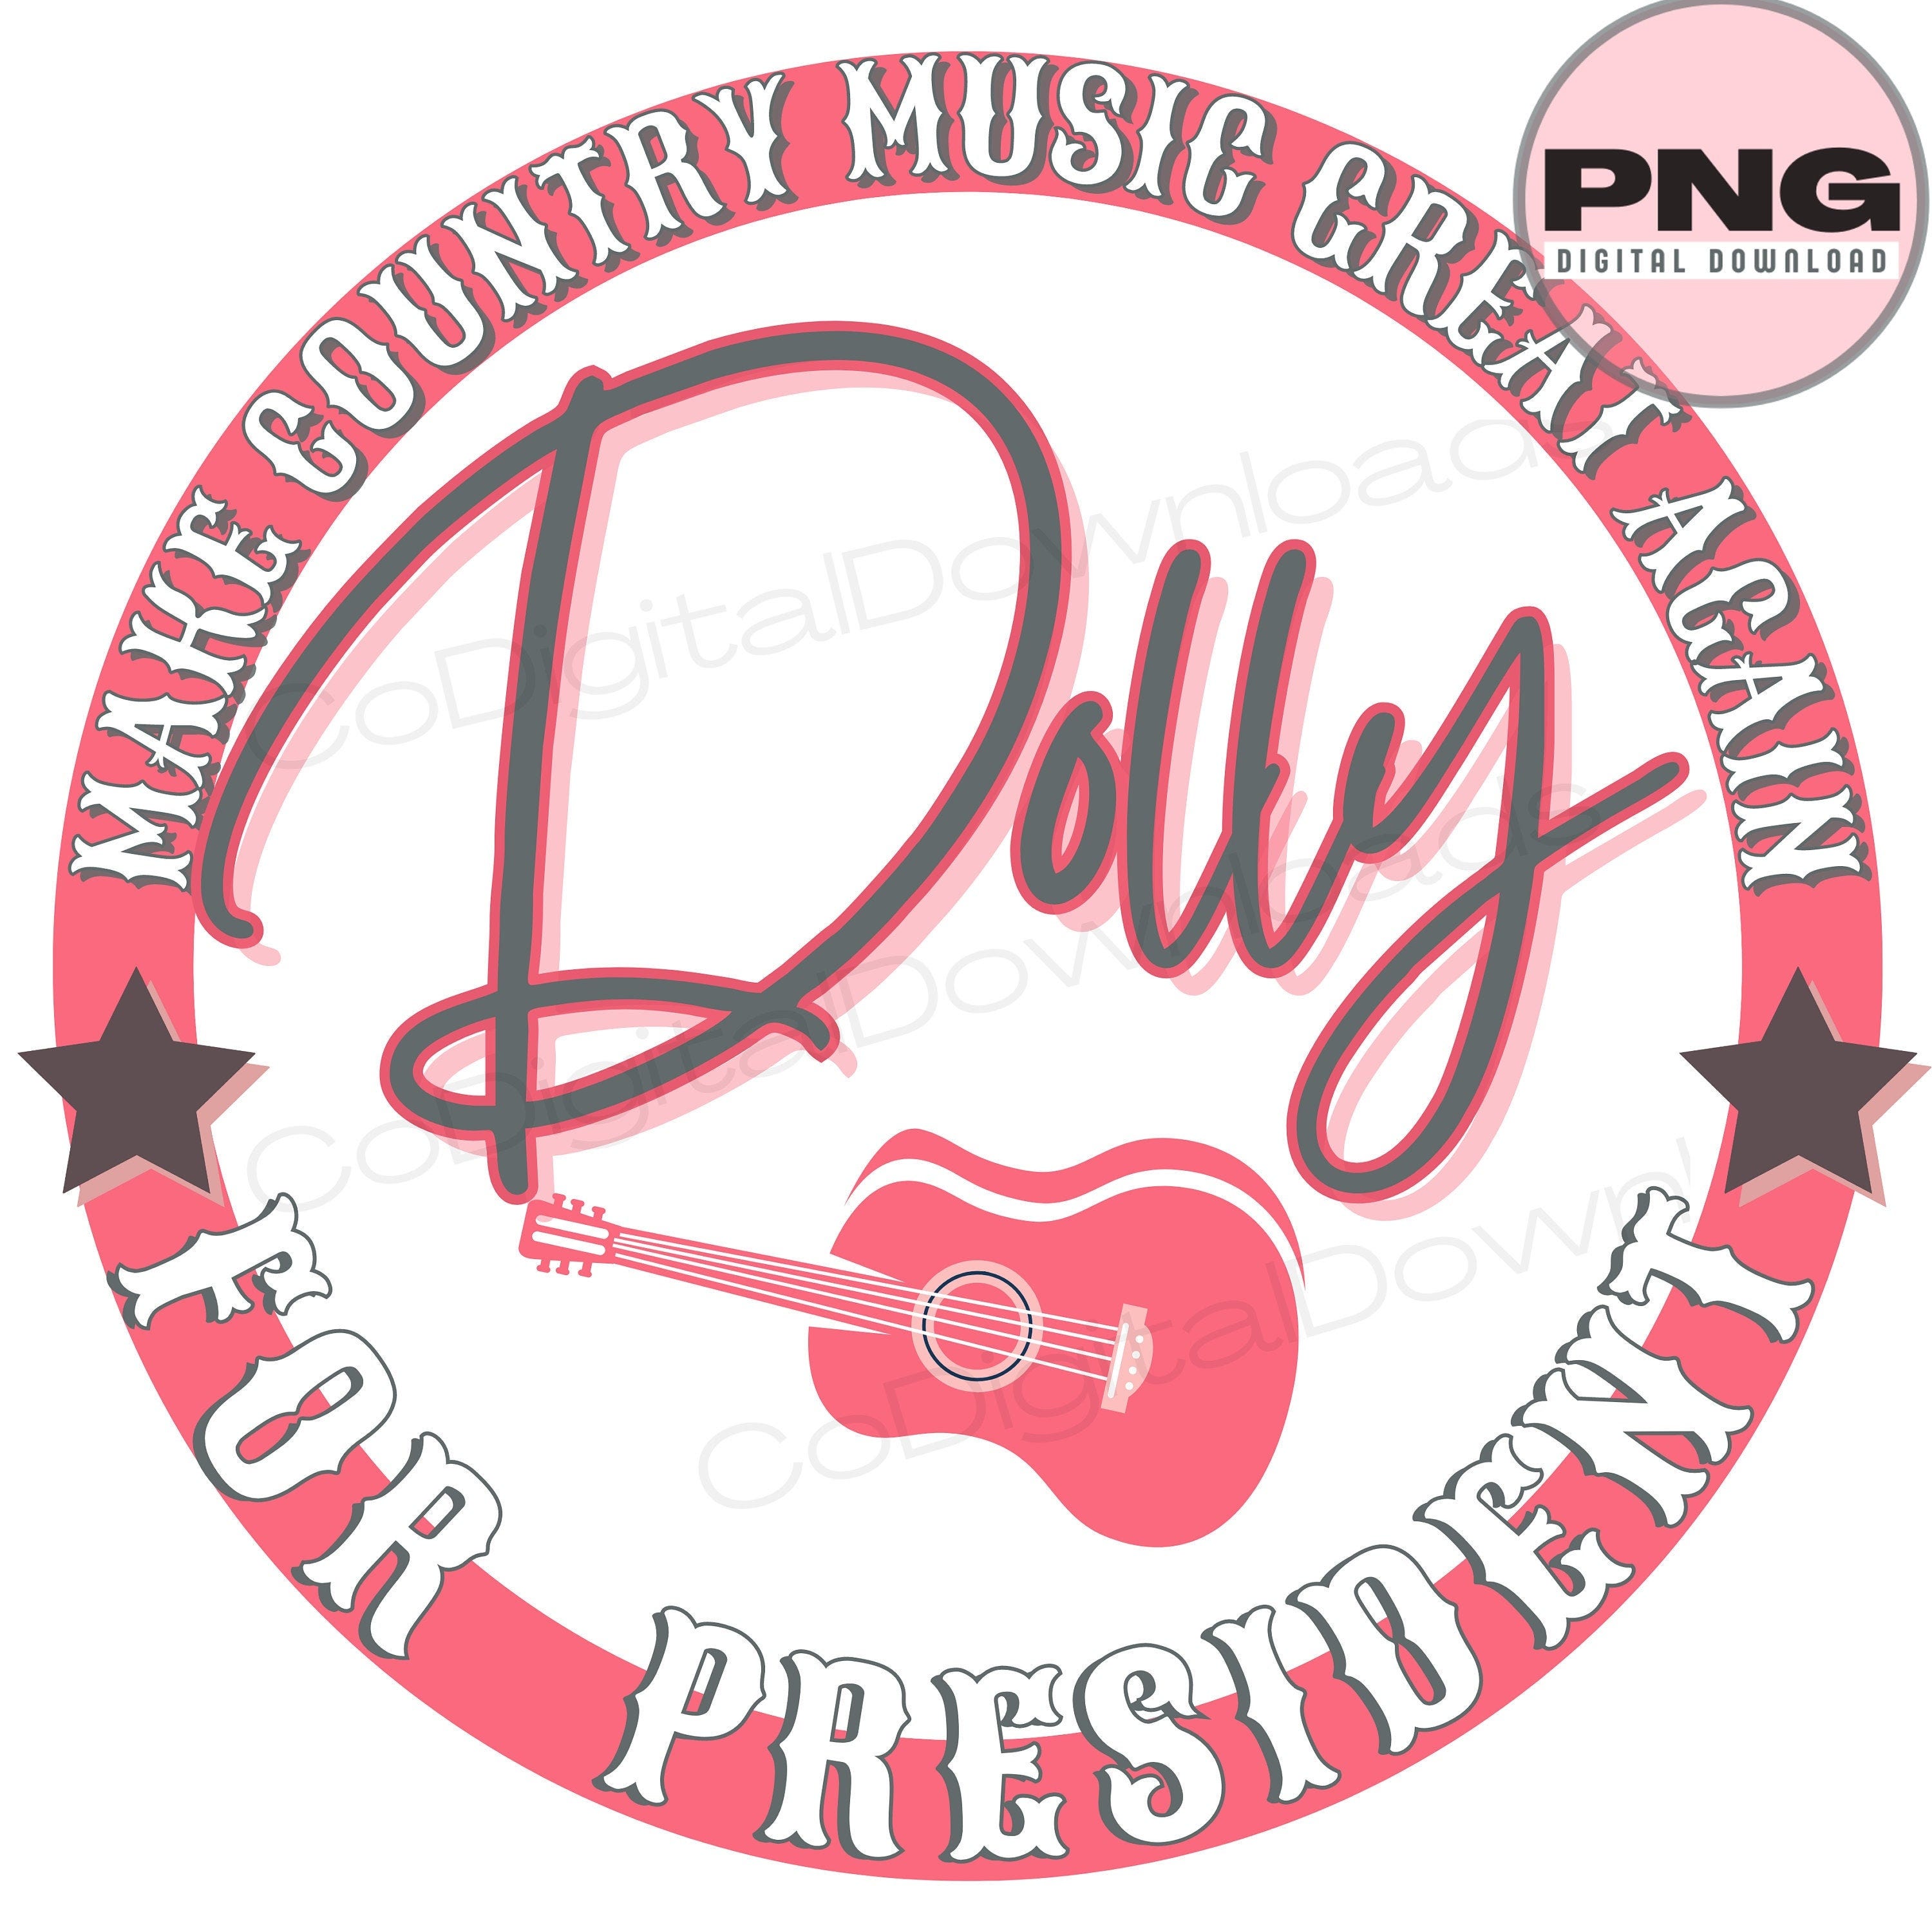 Dolly for President PNG, pink dolly png, country music png, make country music great again, Dolly sublimation, president png